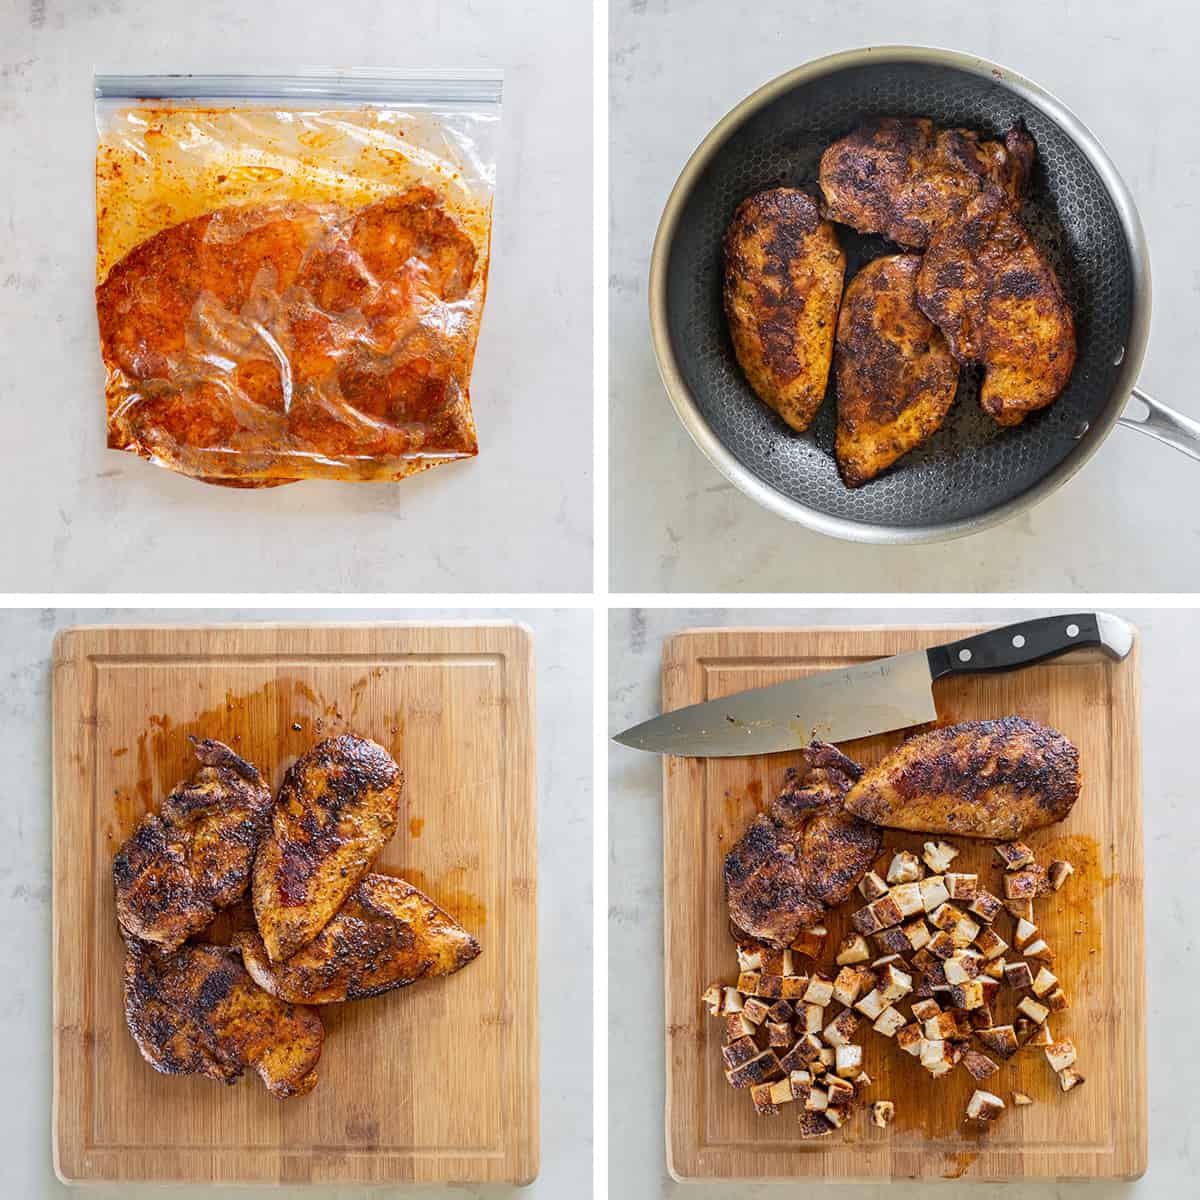 Four images of chicken marinating in a plastic bag, cooking in a skillet, and sliced on a cutting board.